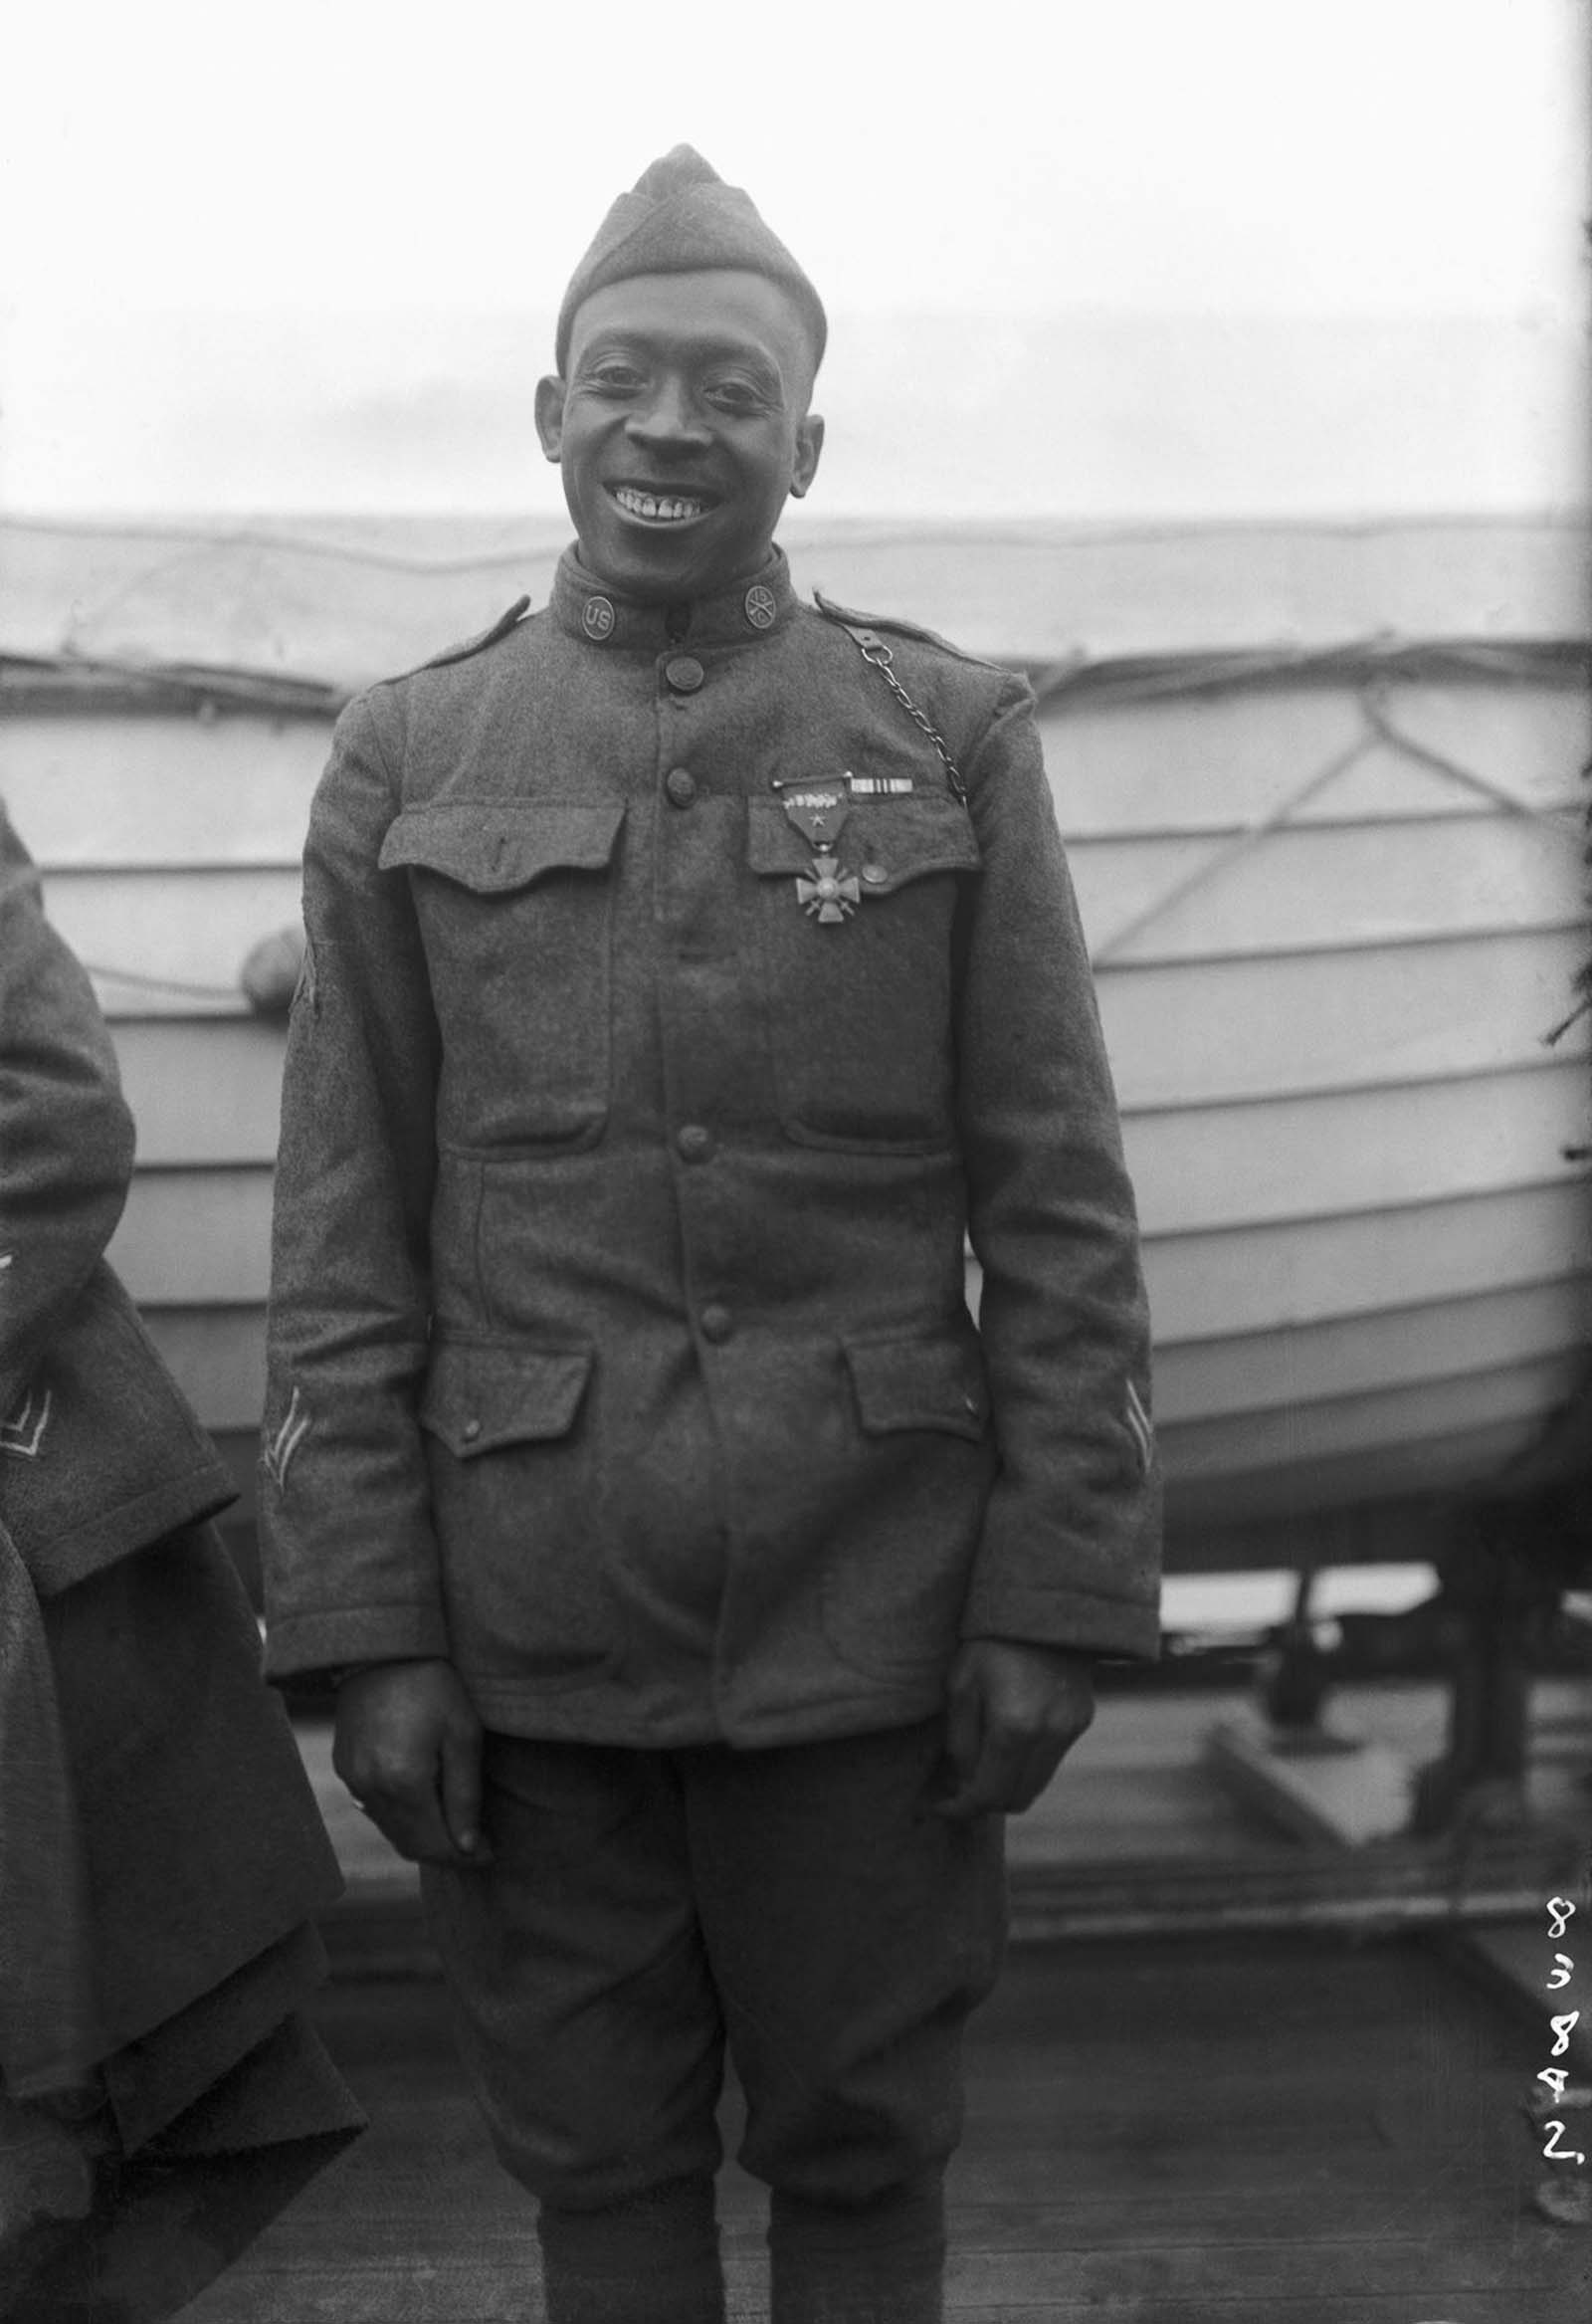 Sgt. Henry Johnson of the 369th poses wearing the Cross of War, awarded for bravery in an outnumbered battle against German forces.